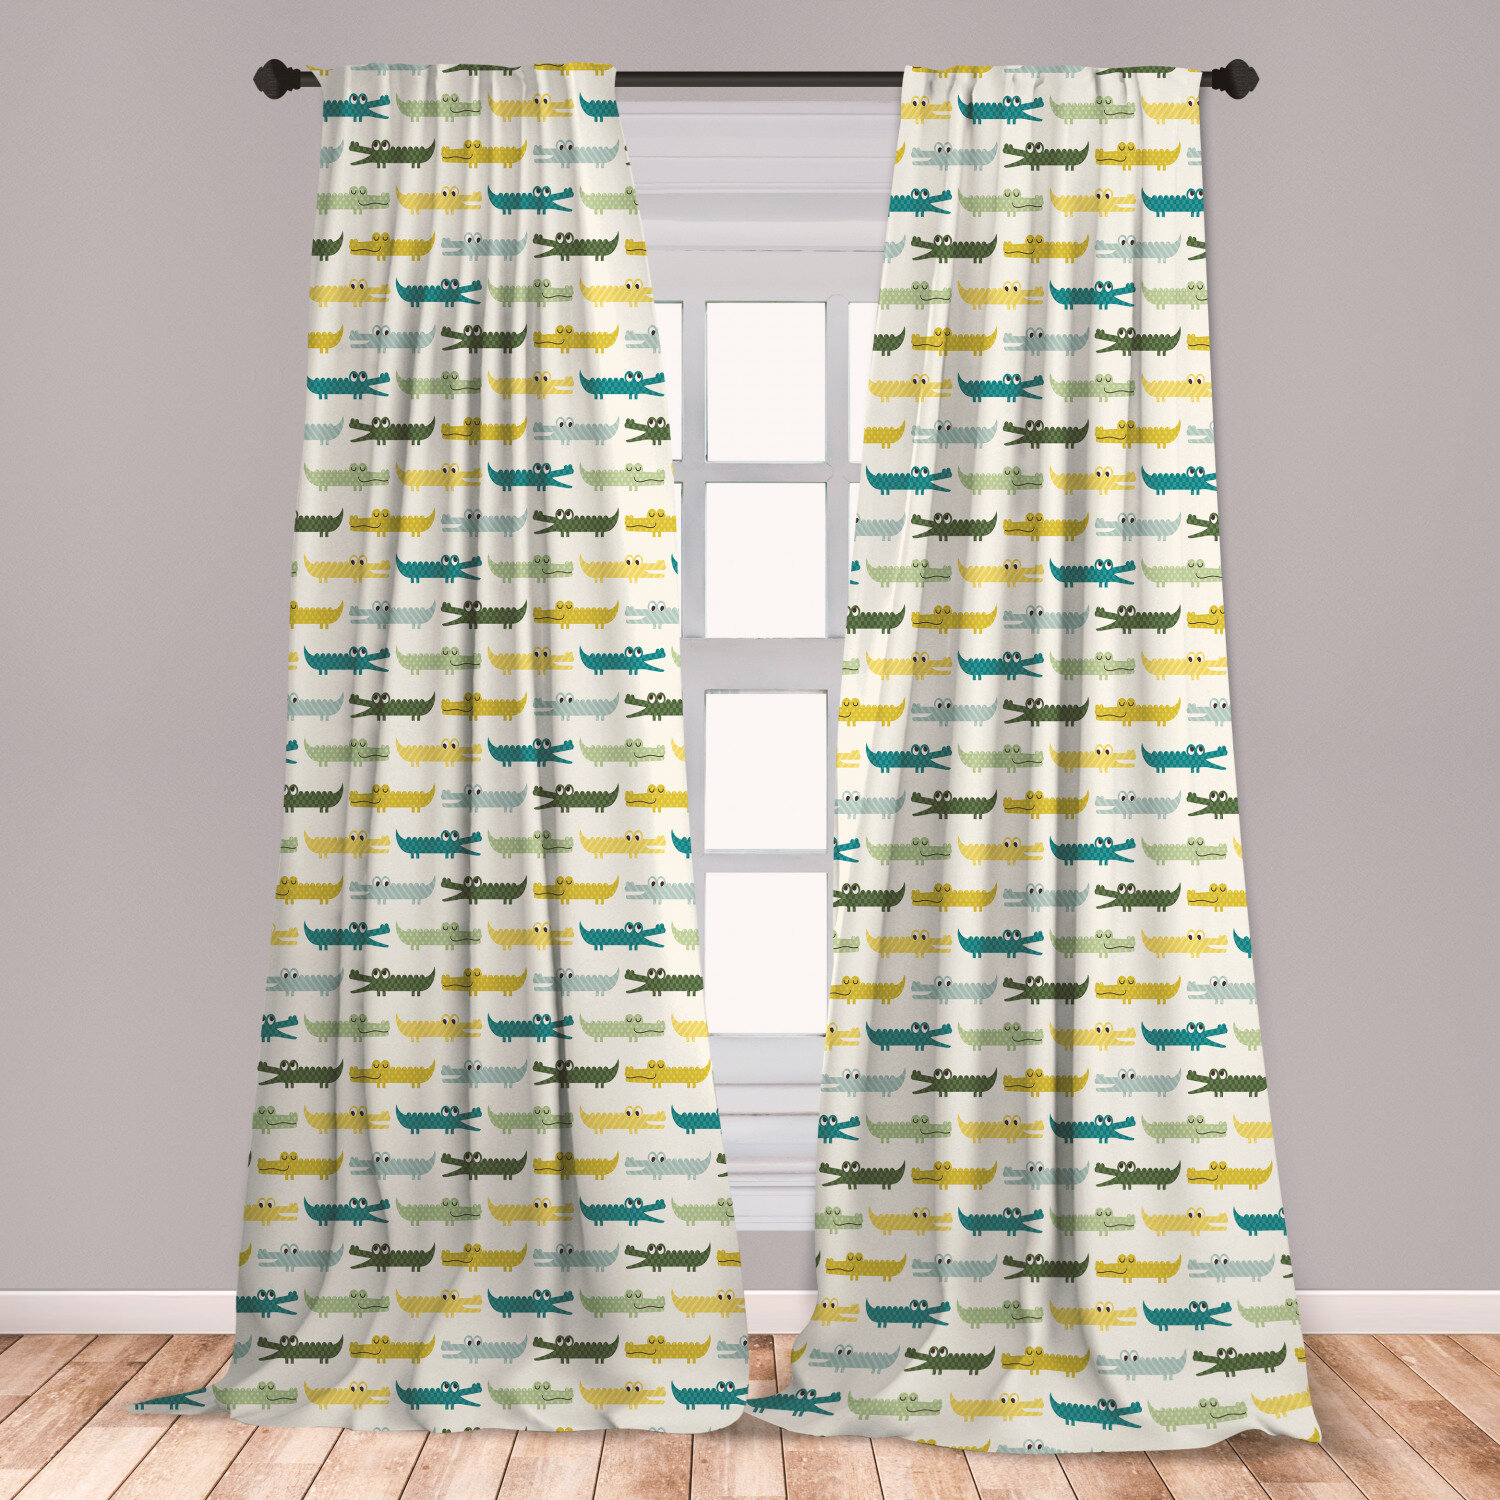 East Urban Home Ambesonne Animal Curtains